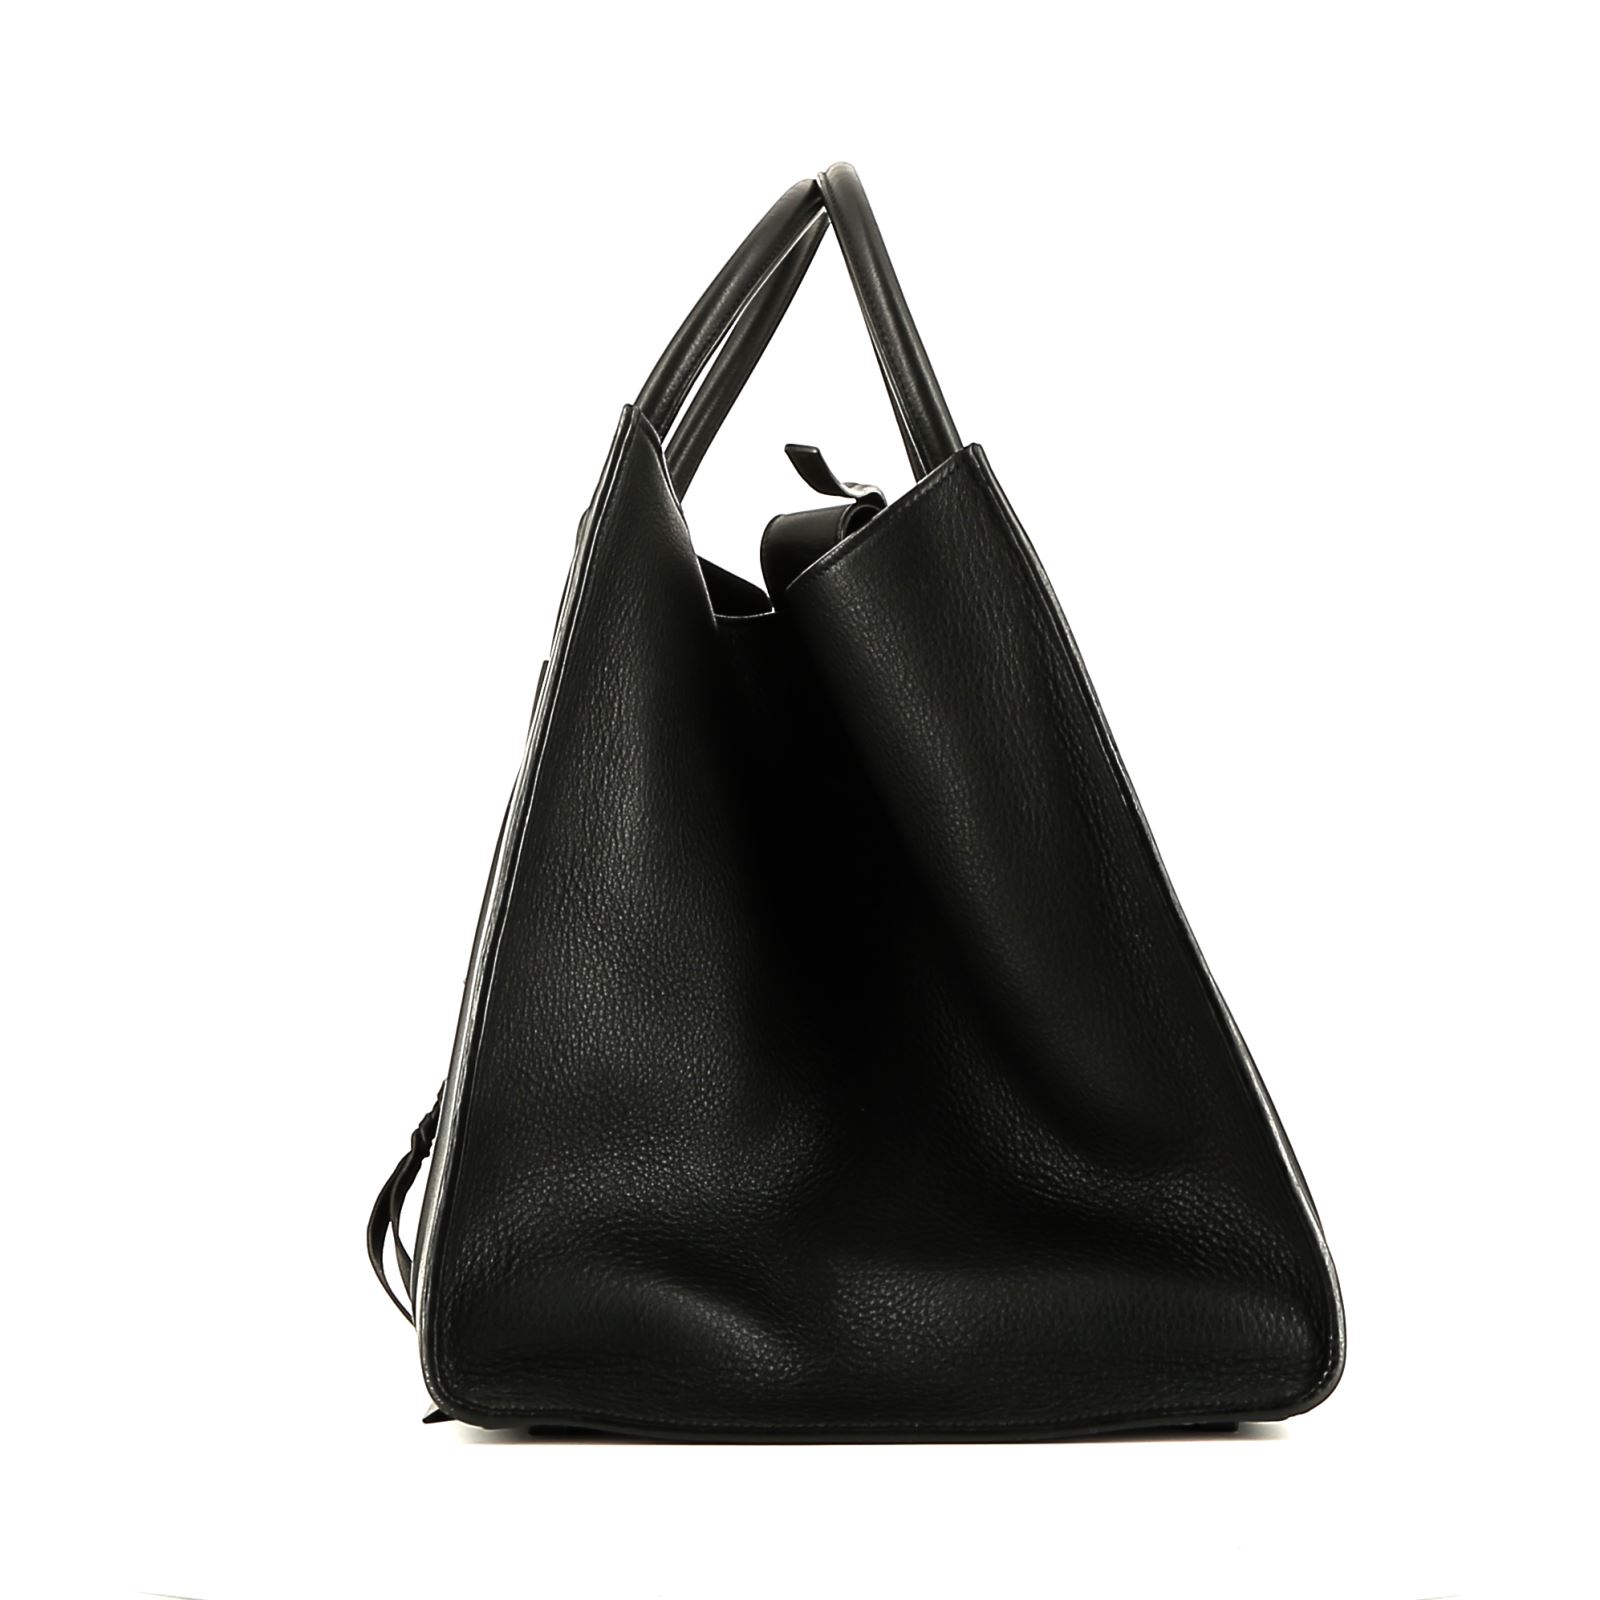 Cabas Phantom Shopping Bag In Black Grained Leather